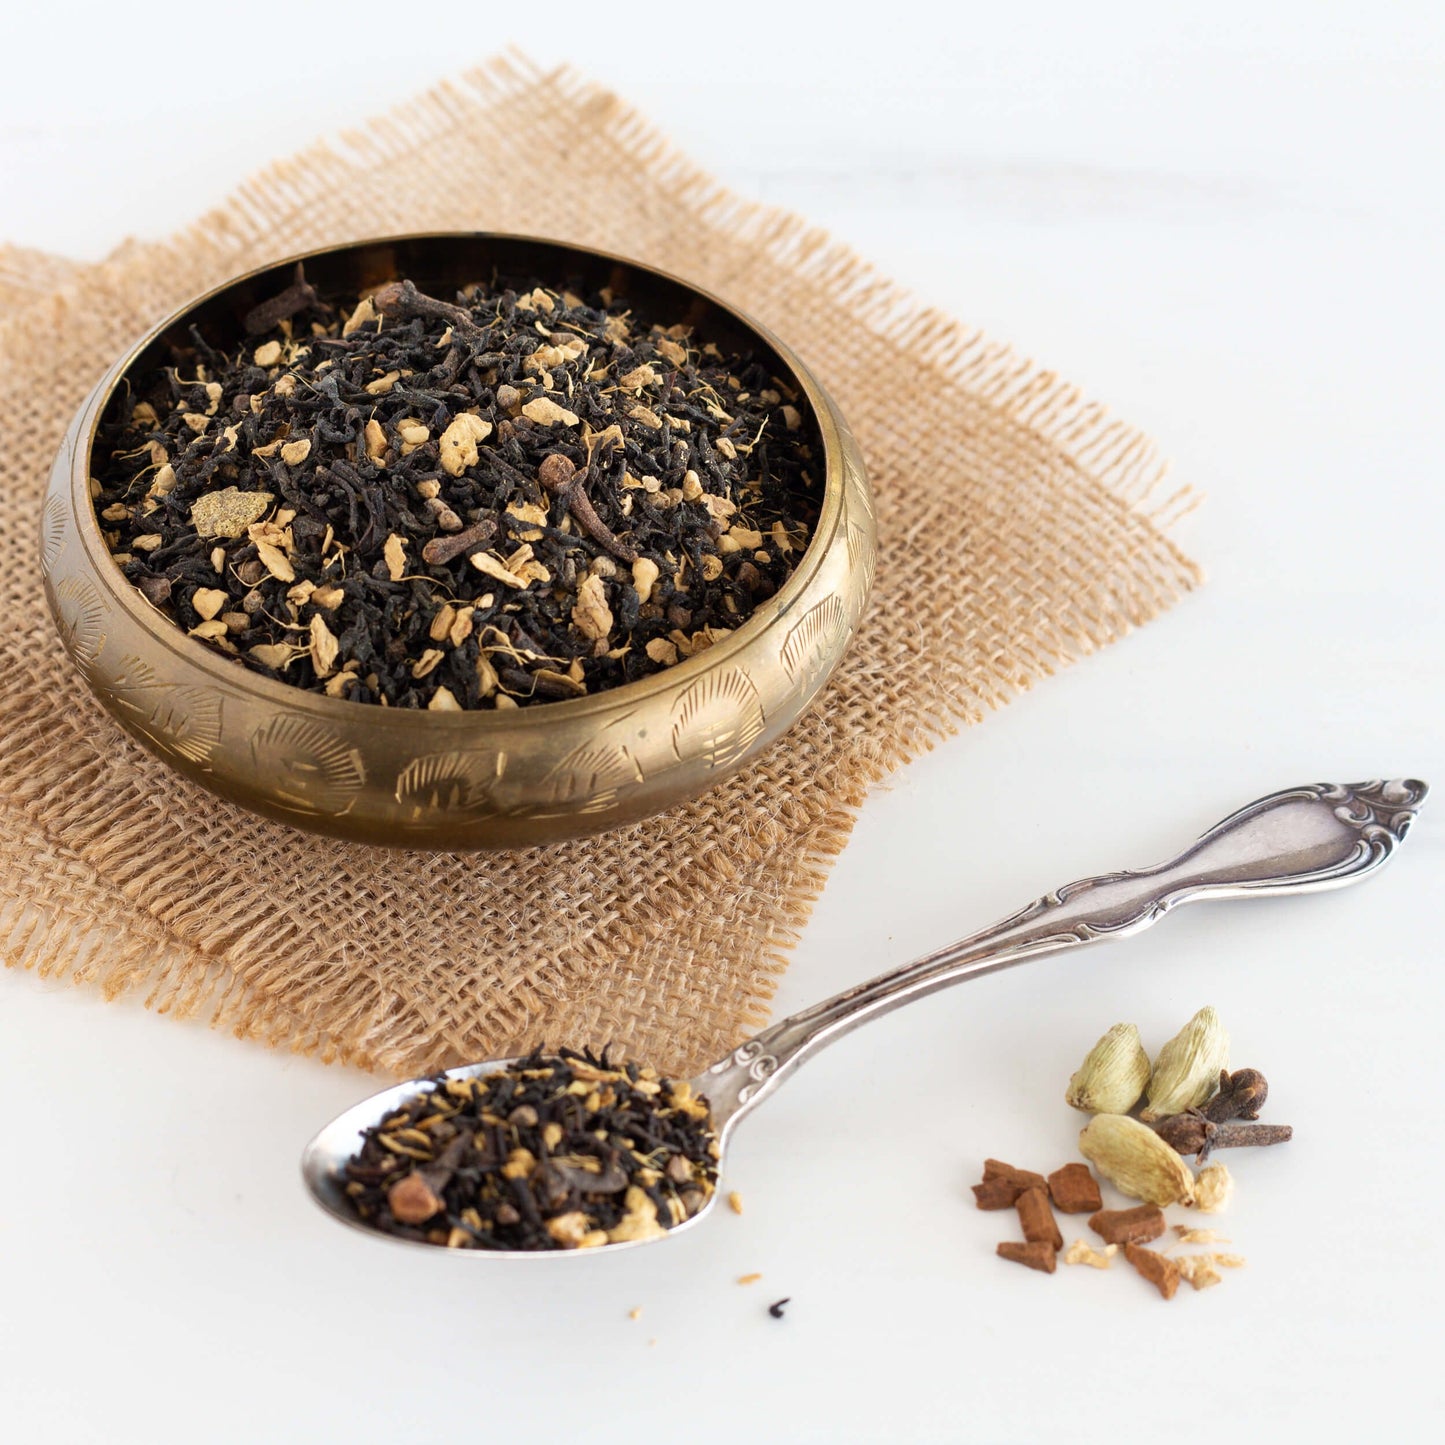 Masala Chai Black Tea shown as loose leaf tea displayed in a small brass bowl on two squares of burlap. A silver spoon with tea leaves in it is in the foreground